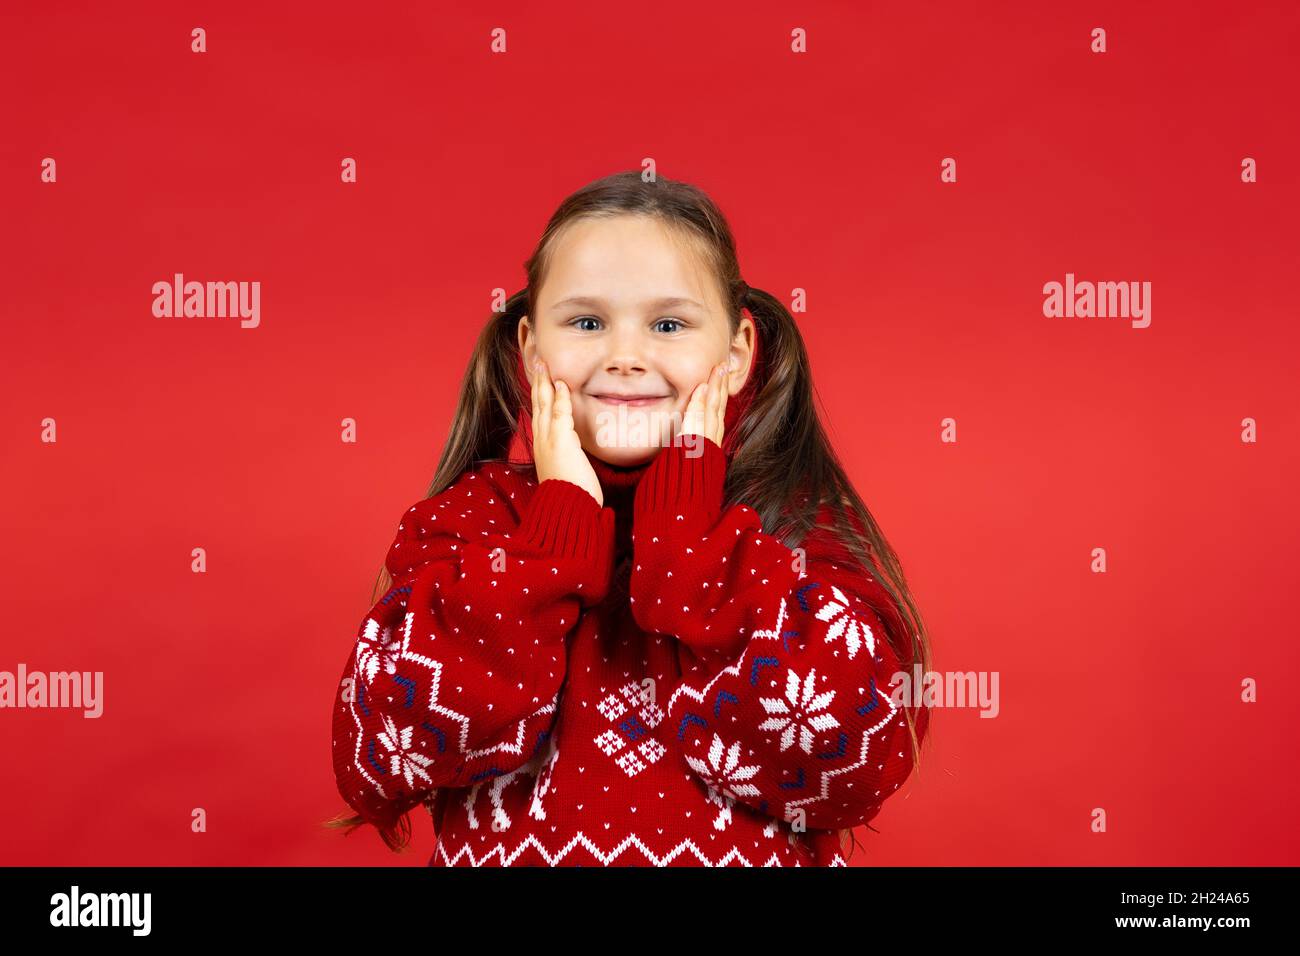 close-up portrait of beautiful happy girl in red knitted Christmas sweater with reindeer touching her face with hands, isolated on red background Stock Photo